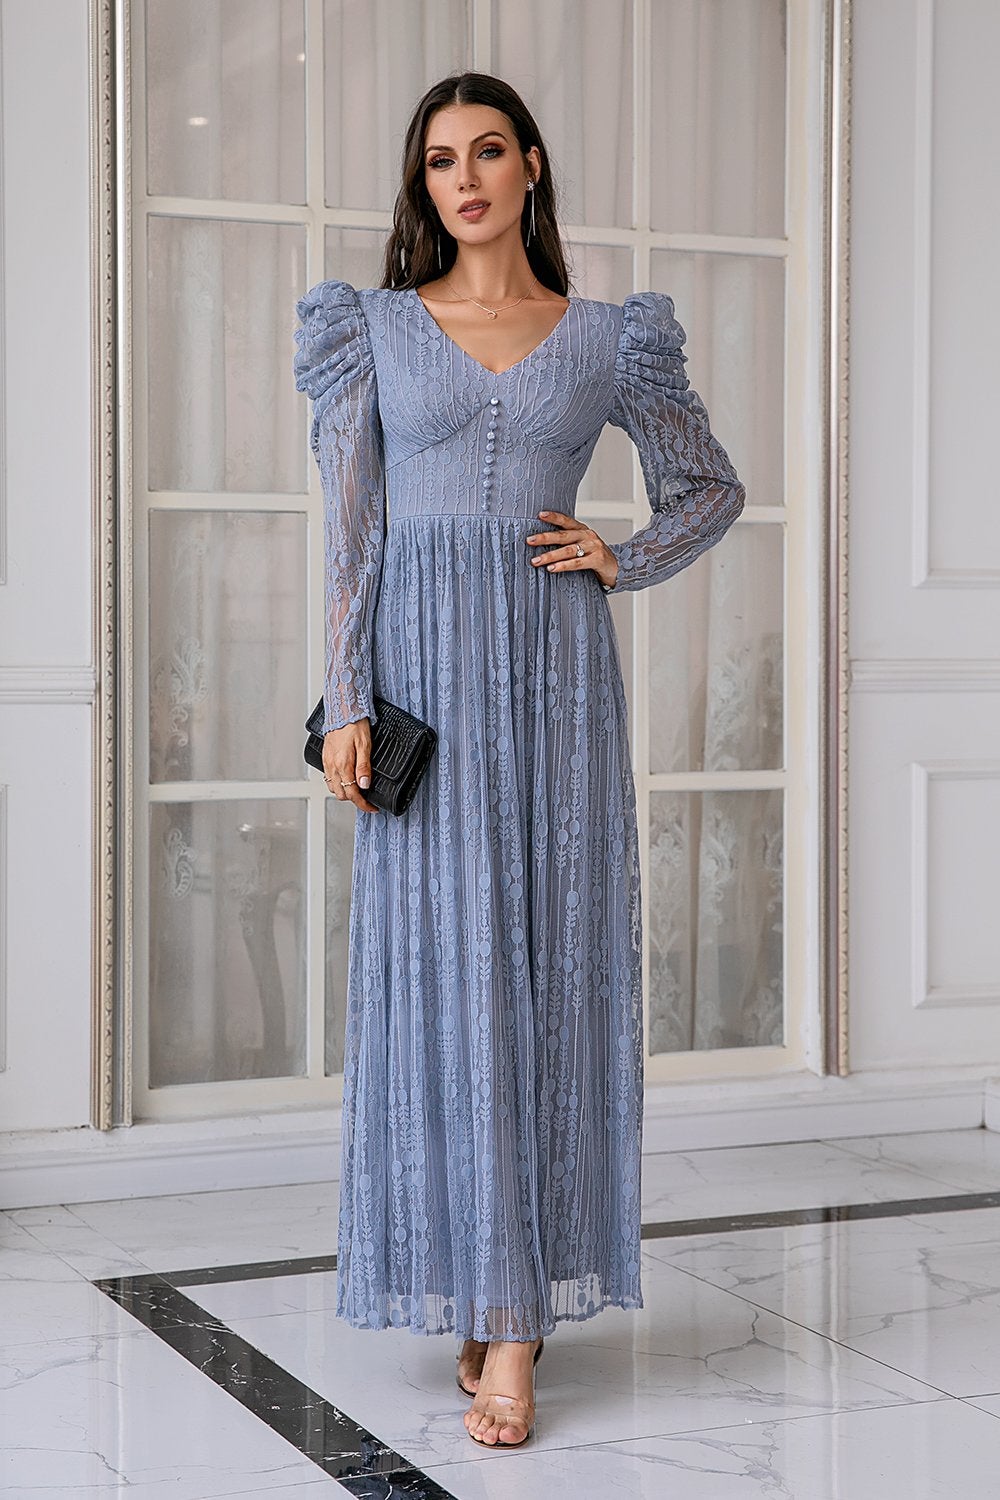 Blue Lace Long Prom Dress with Sleeves